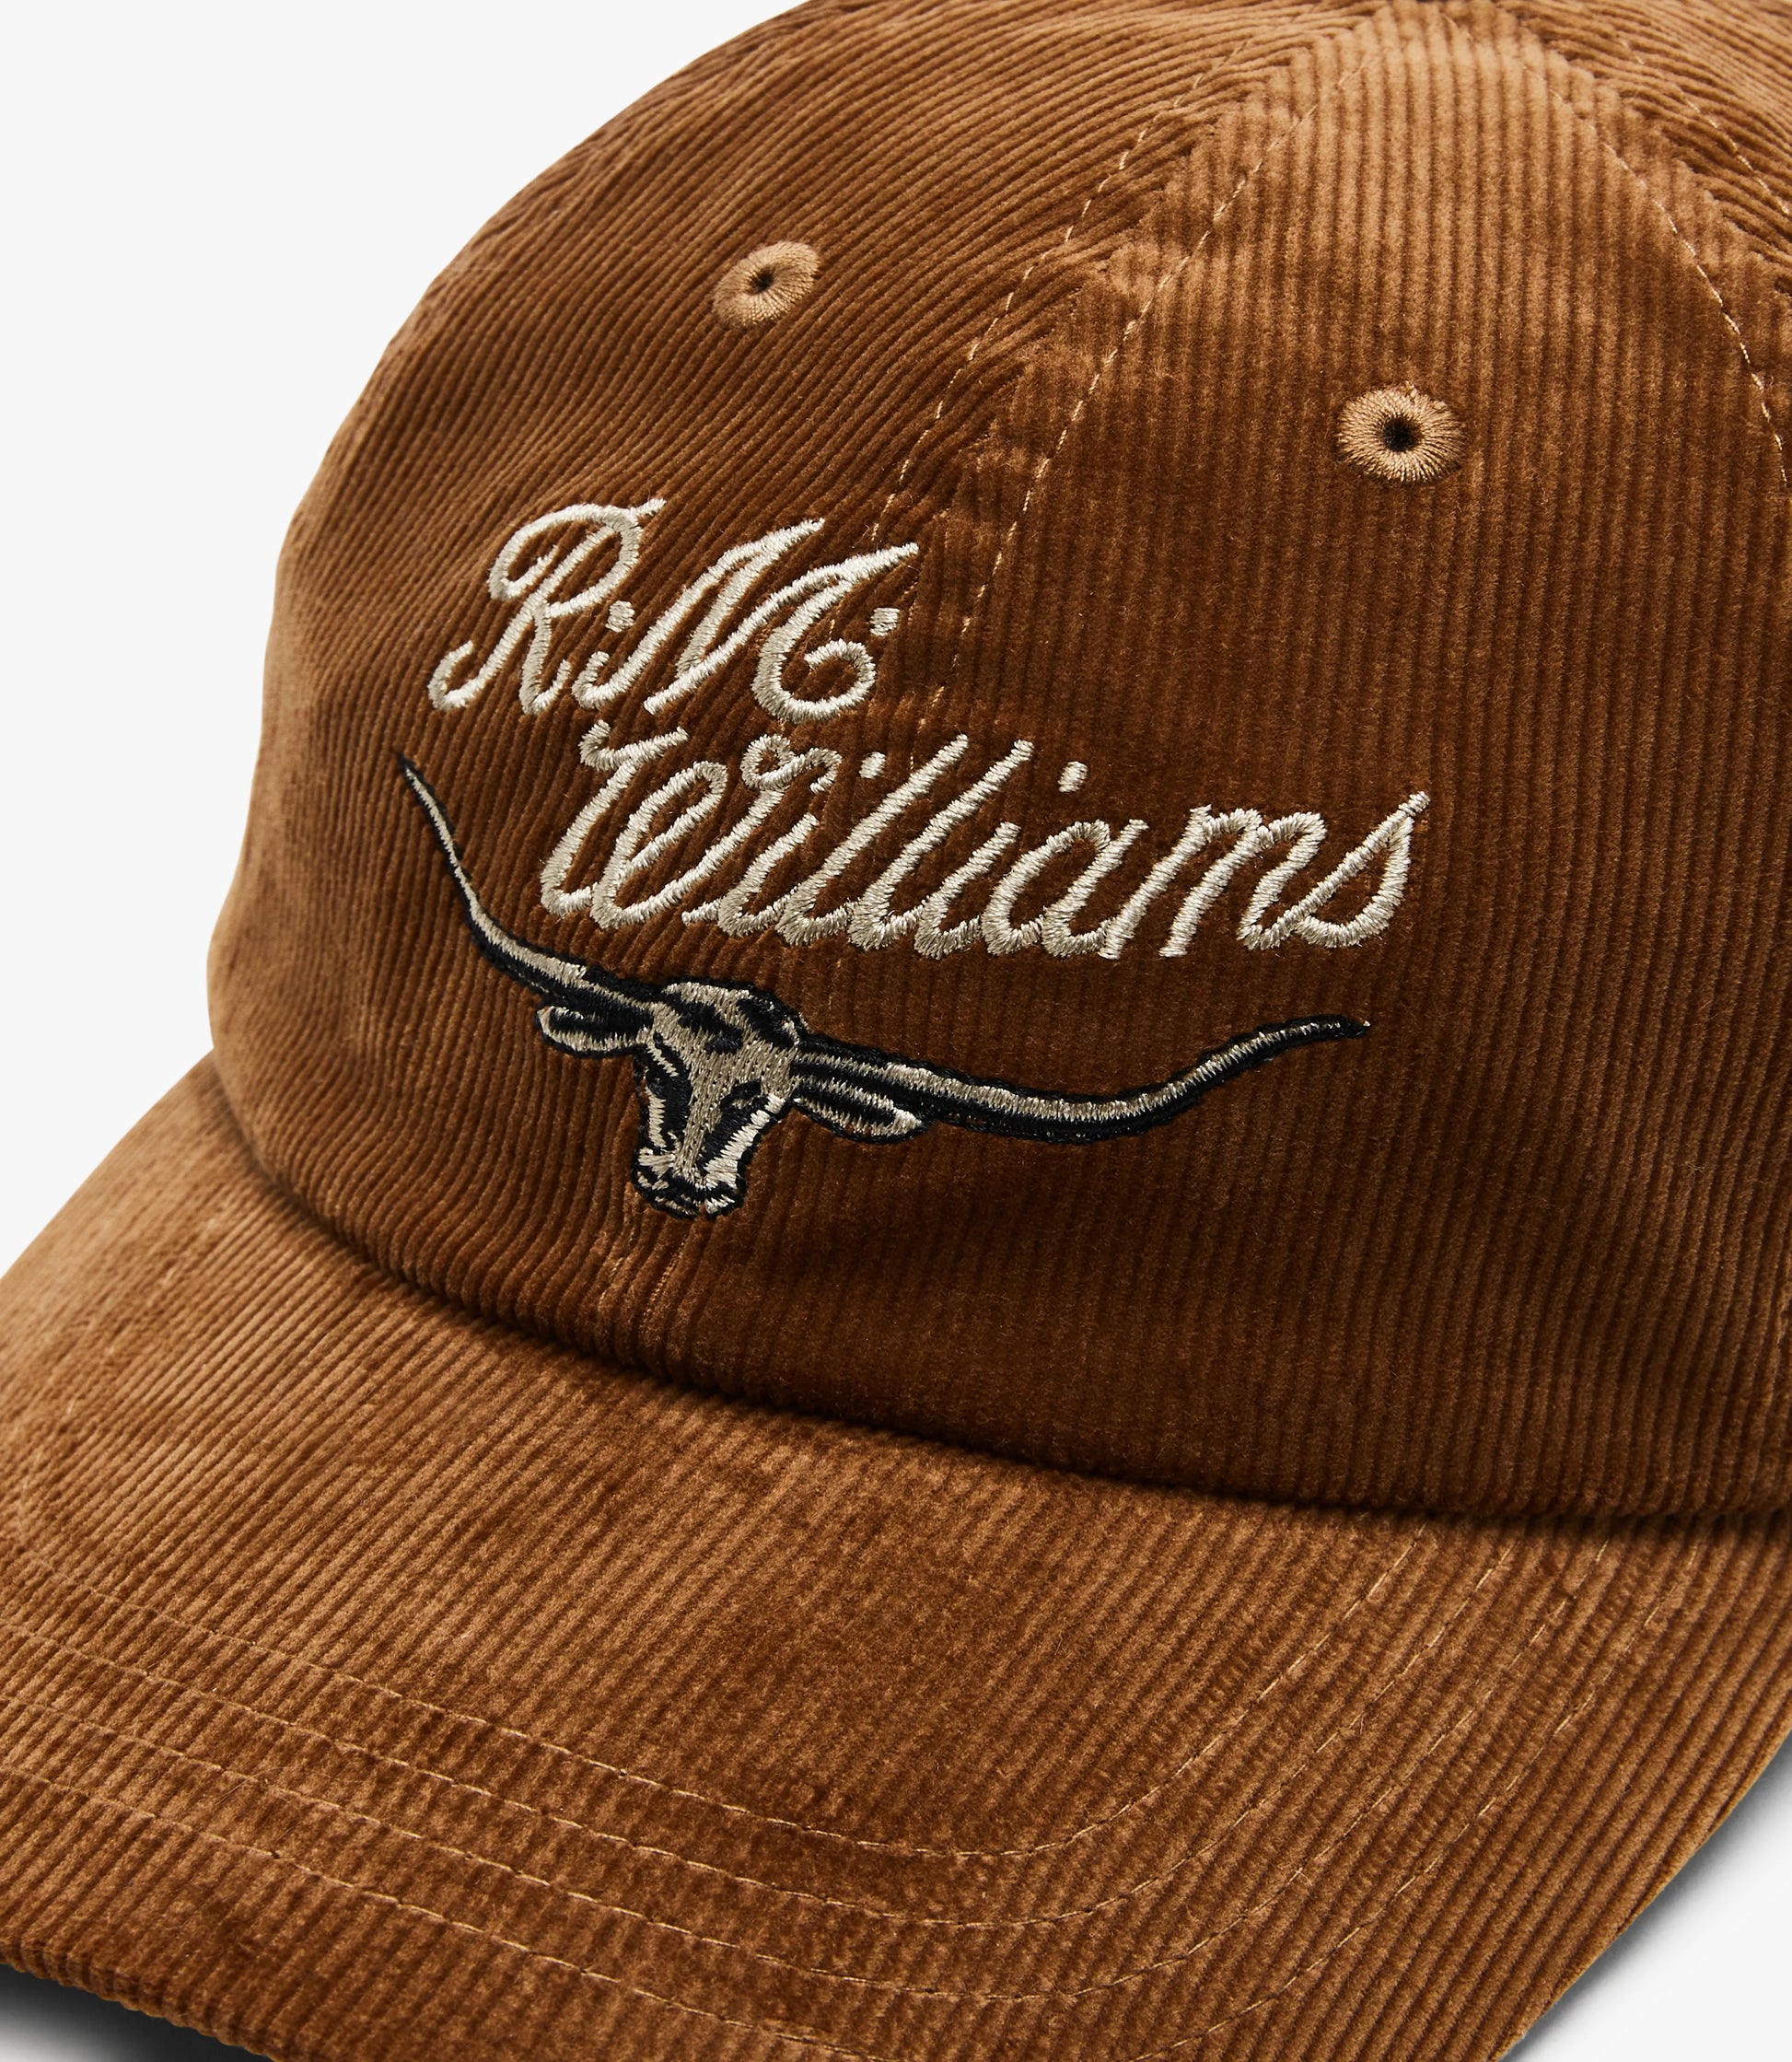 RM Williams Corduroy Longhorn Cap - Mens from Humes Outfitters